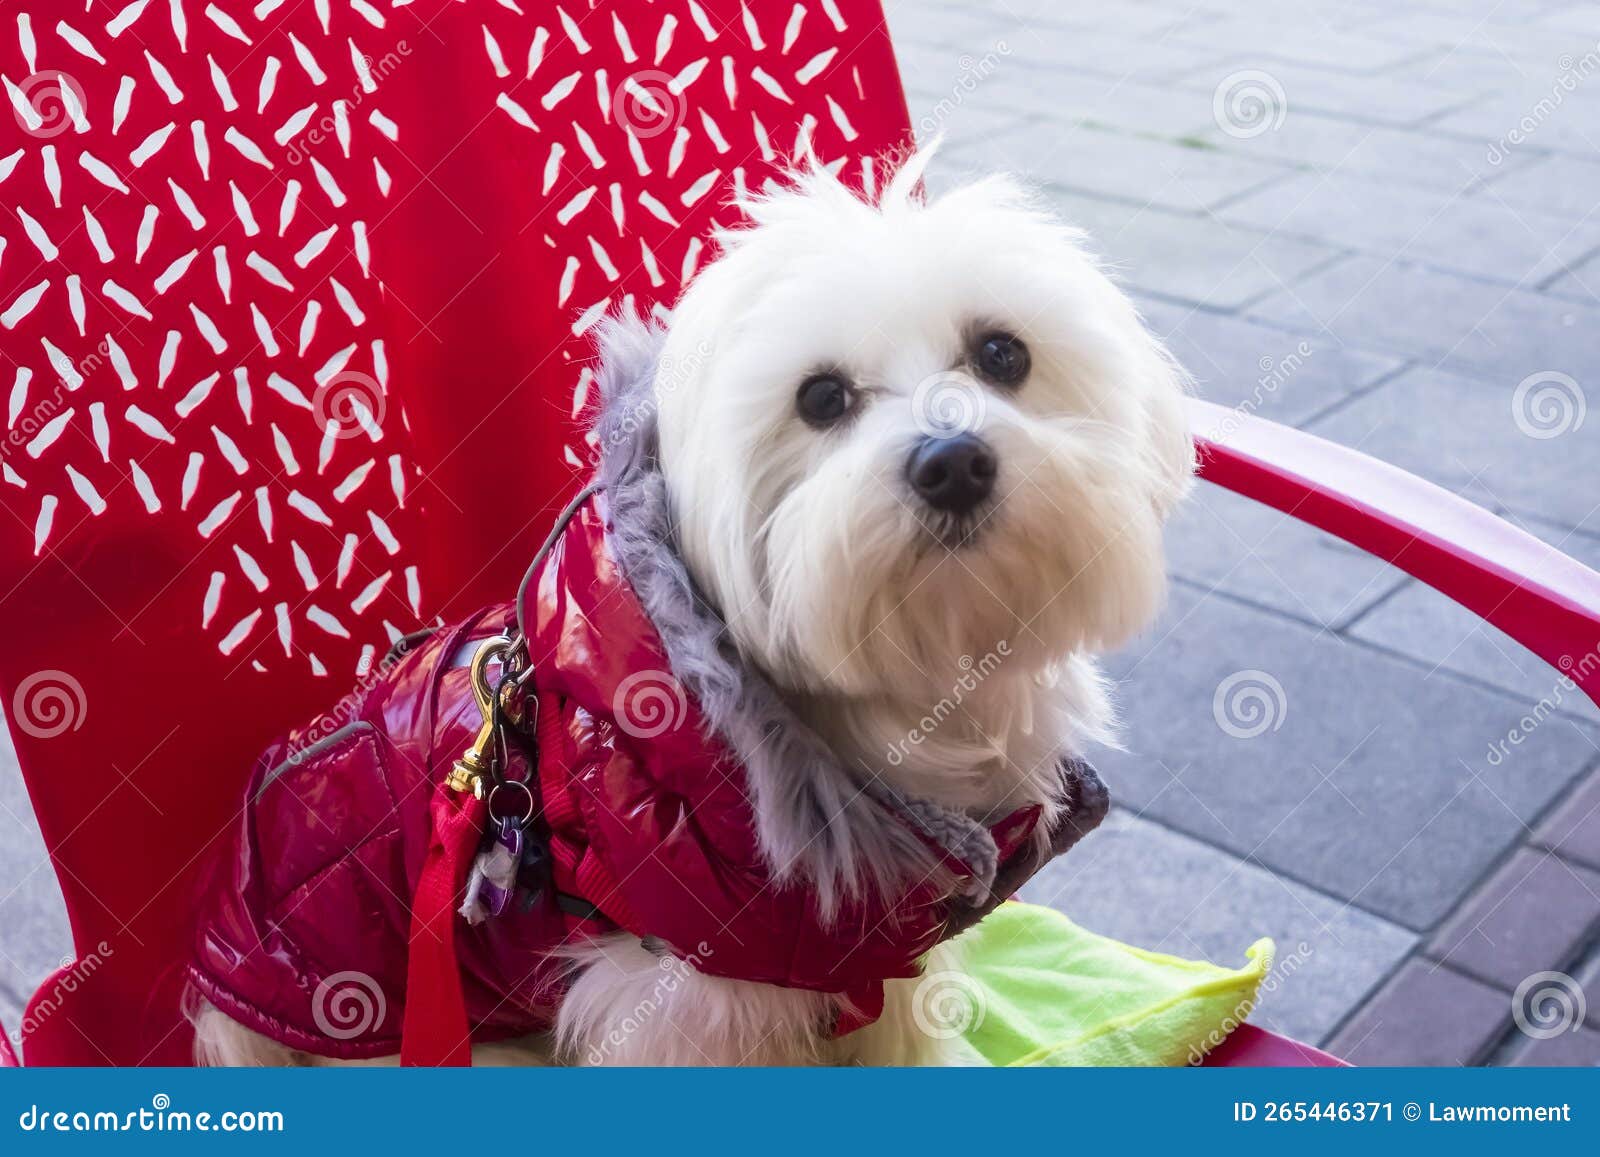 a bichon maltese dog looking at the camera sitting on a chair at a terraza